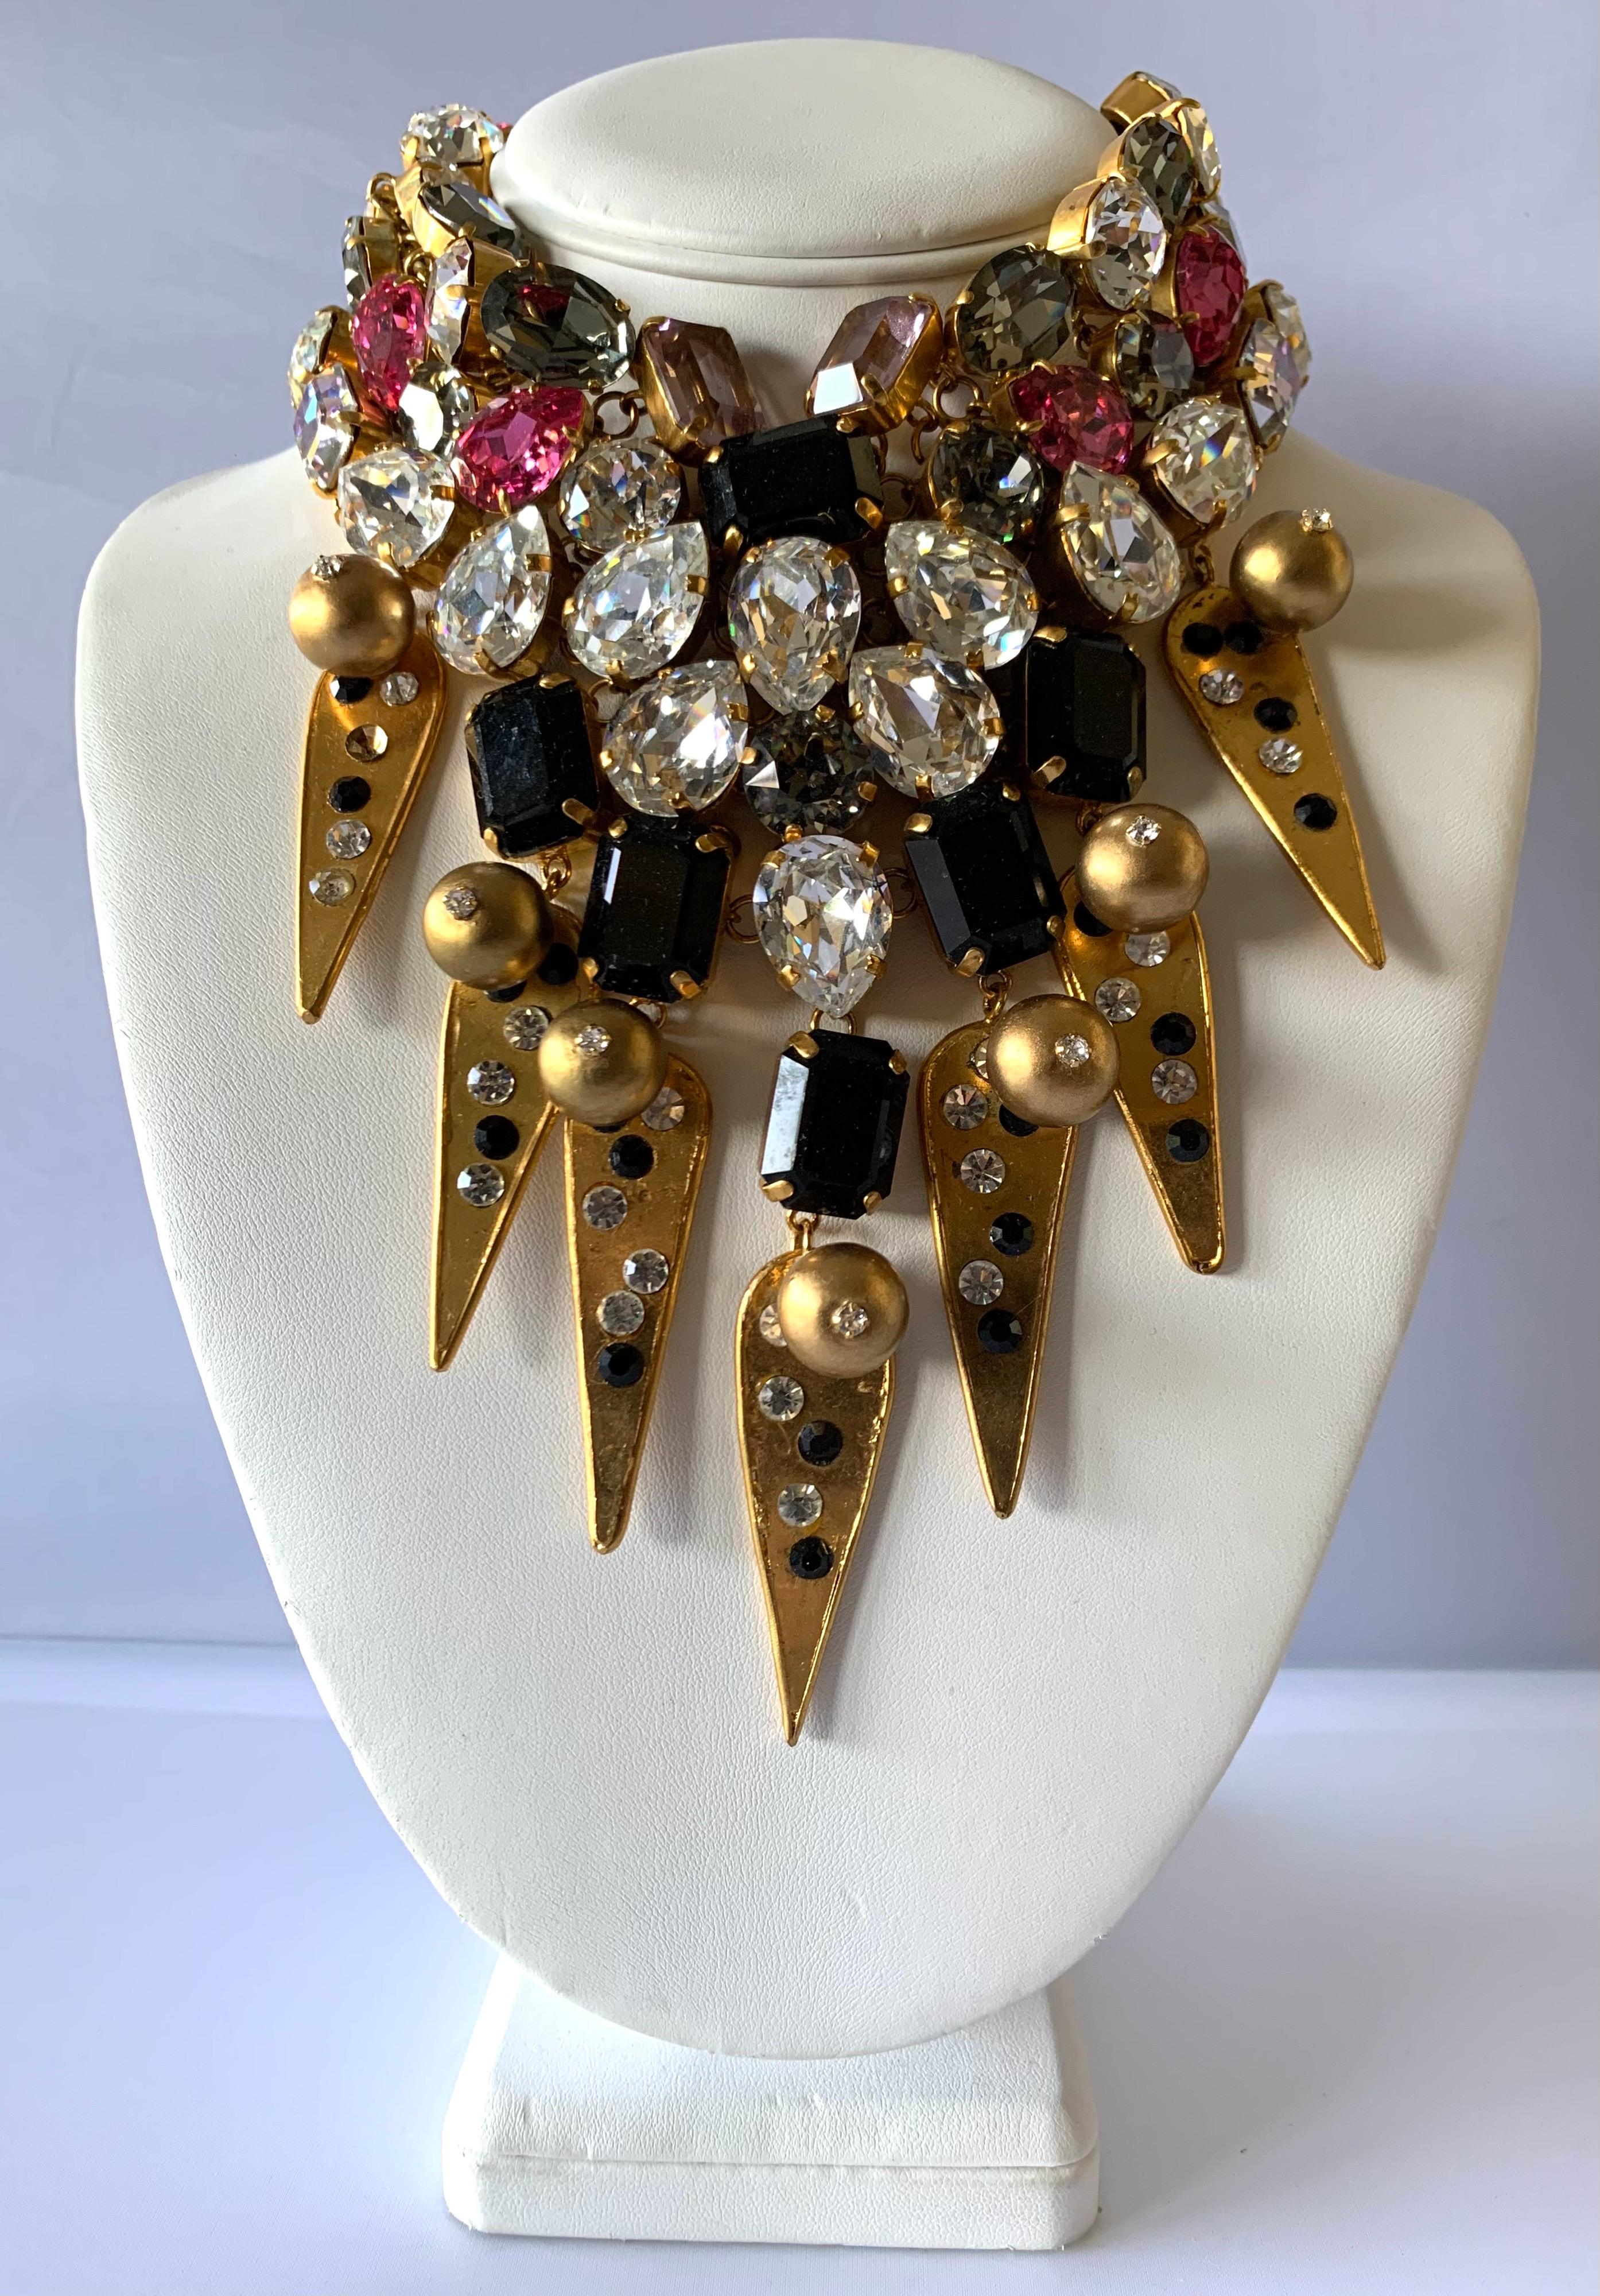 Massive Christian Lacroix haute couture fall/winter 1992/1993 runway-defile jeweled necklace featuring a contemporary design accented by large glass faceted stones, gold design elements, and large faux pearls, signed Christian Lacroix.

Note: the